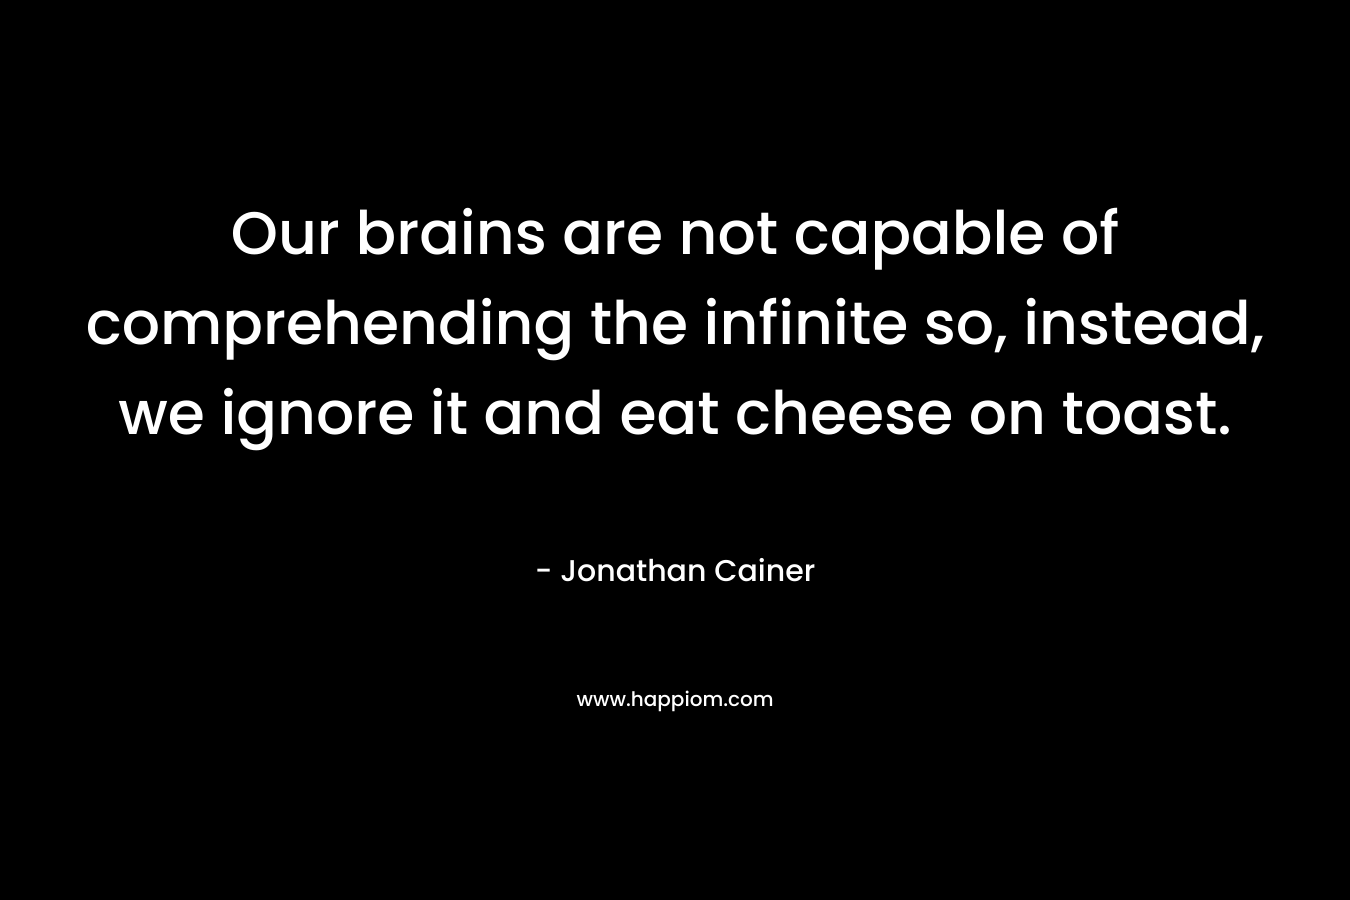 Our brains are not capable of comprehending the infinite so, instead, we ignore it and eat cheese on toast. – Jonathan Cainer